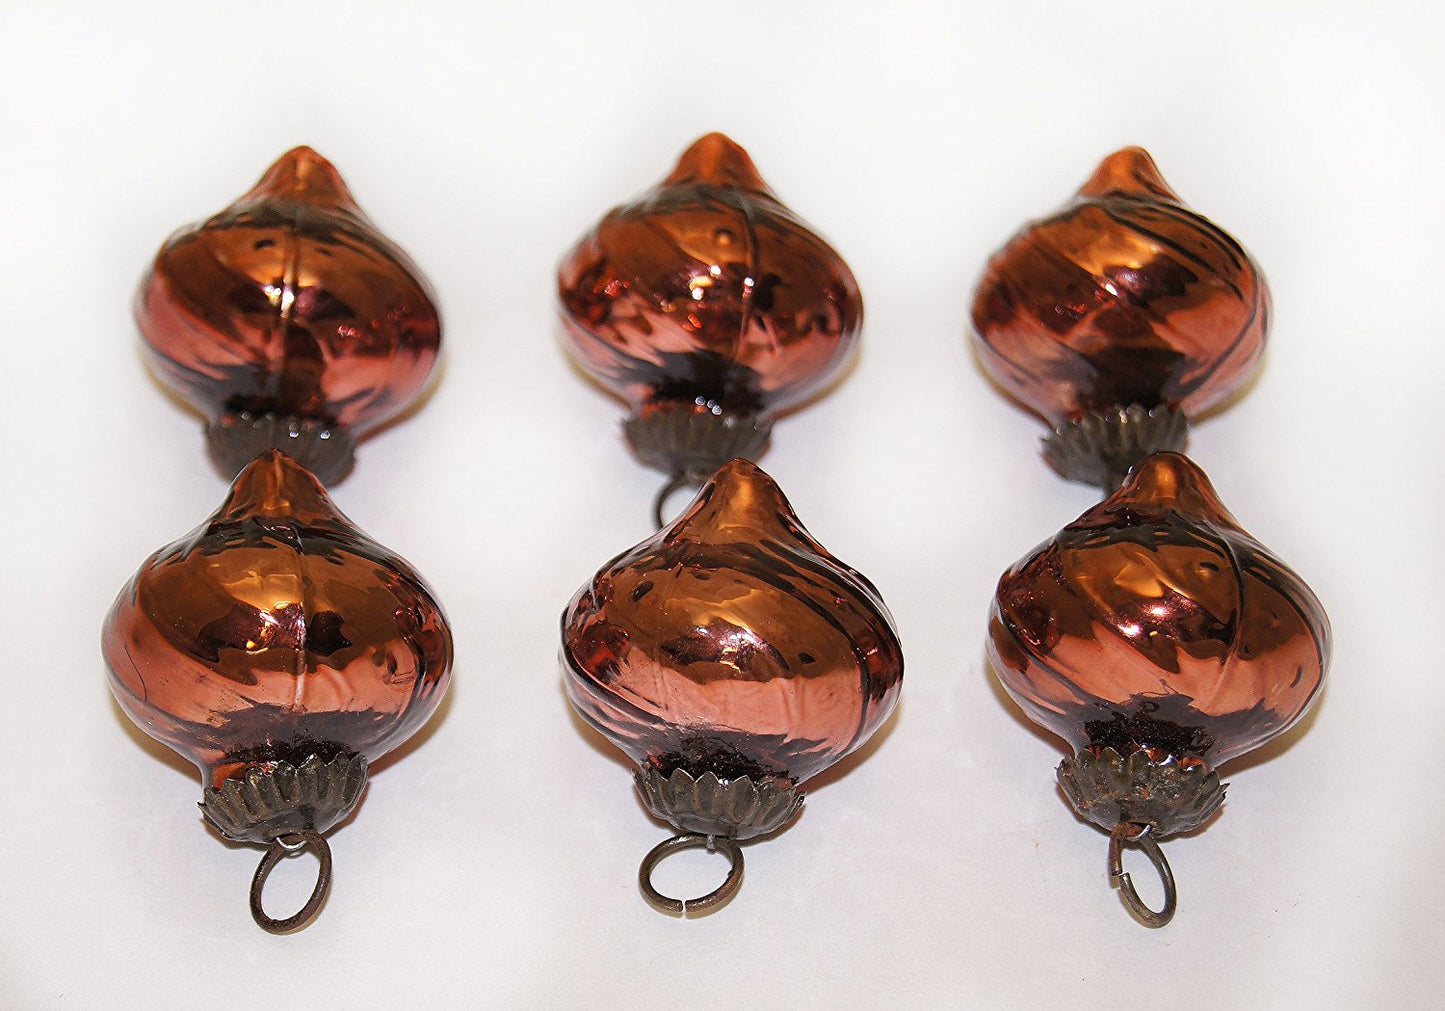 Giftbay Antique-look Glass Ornament Set of 6 for Christmas Tree Decoration